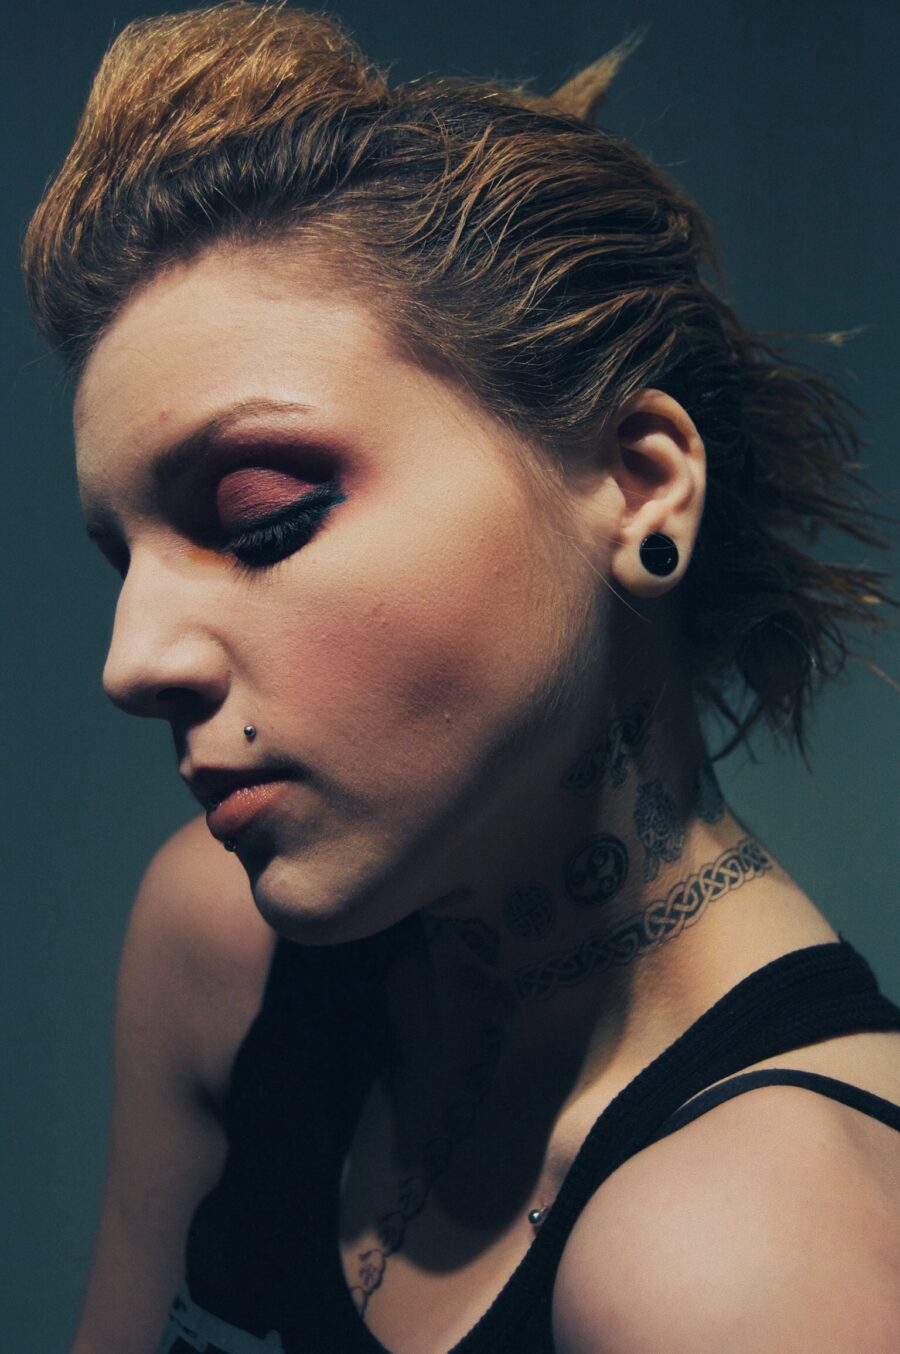 Punk rock photoshoot with blonde chicago girl looking down with heavy makeup